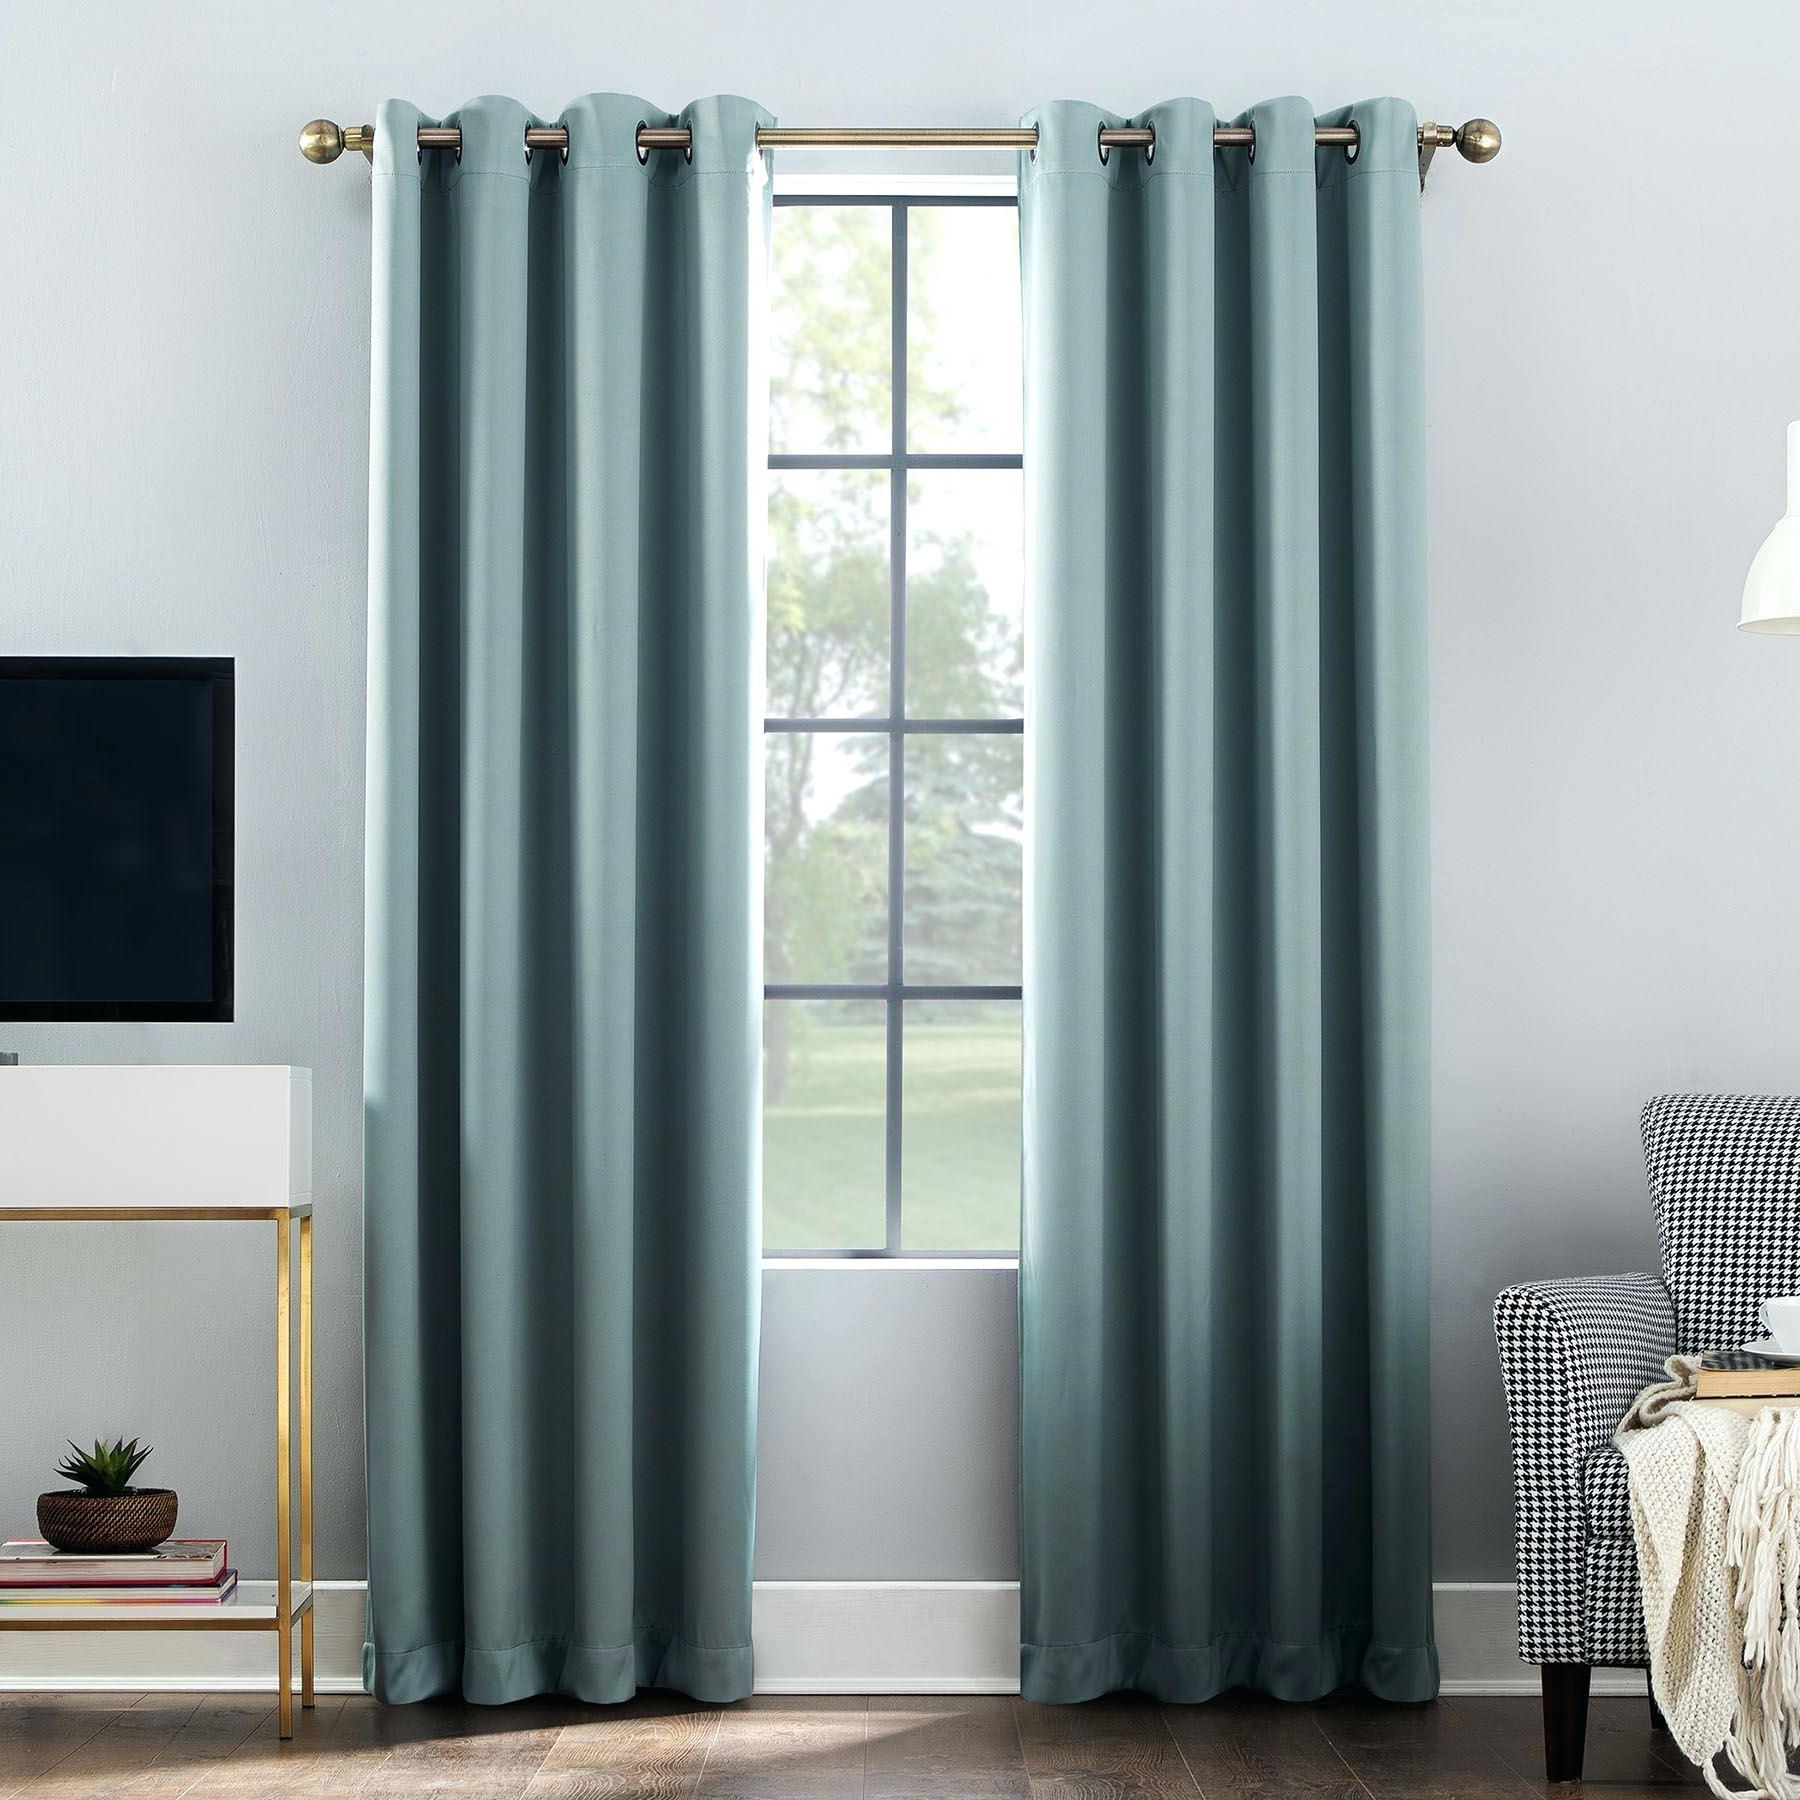 2021 Ultimate Blackout Short Length Grommet Curtain Panels With Regard To Marvellous Grommet Curtains Outdoor On Sale Blackout Diy (View 15 of 20)